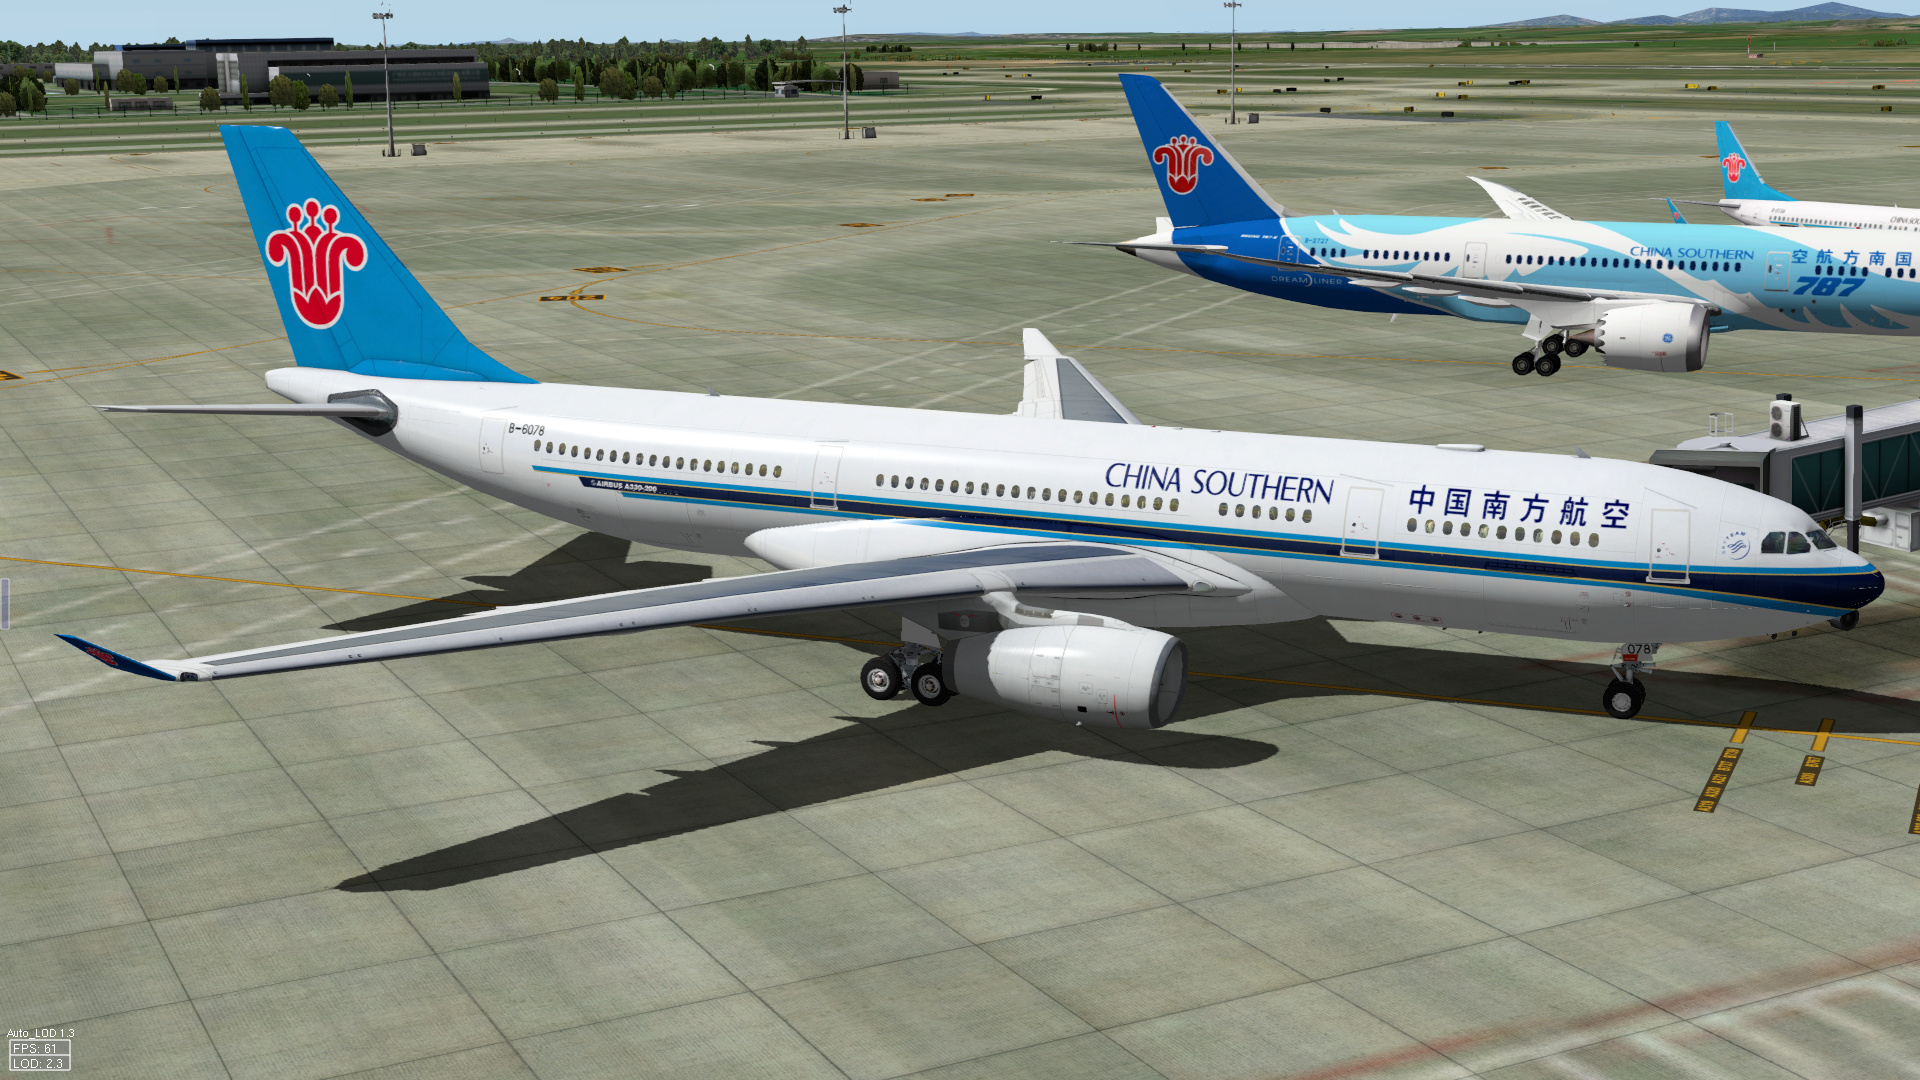 China Southern Airlines (Travels), China Southern, Simliveries, 1920x1080 Full HD Desktop